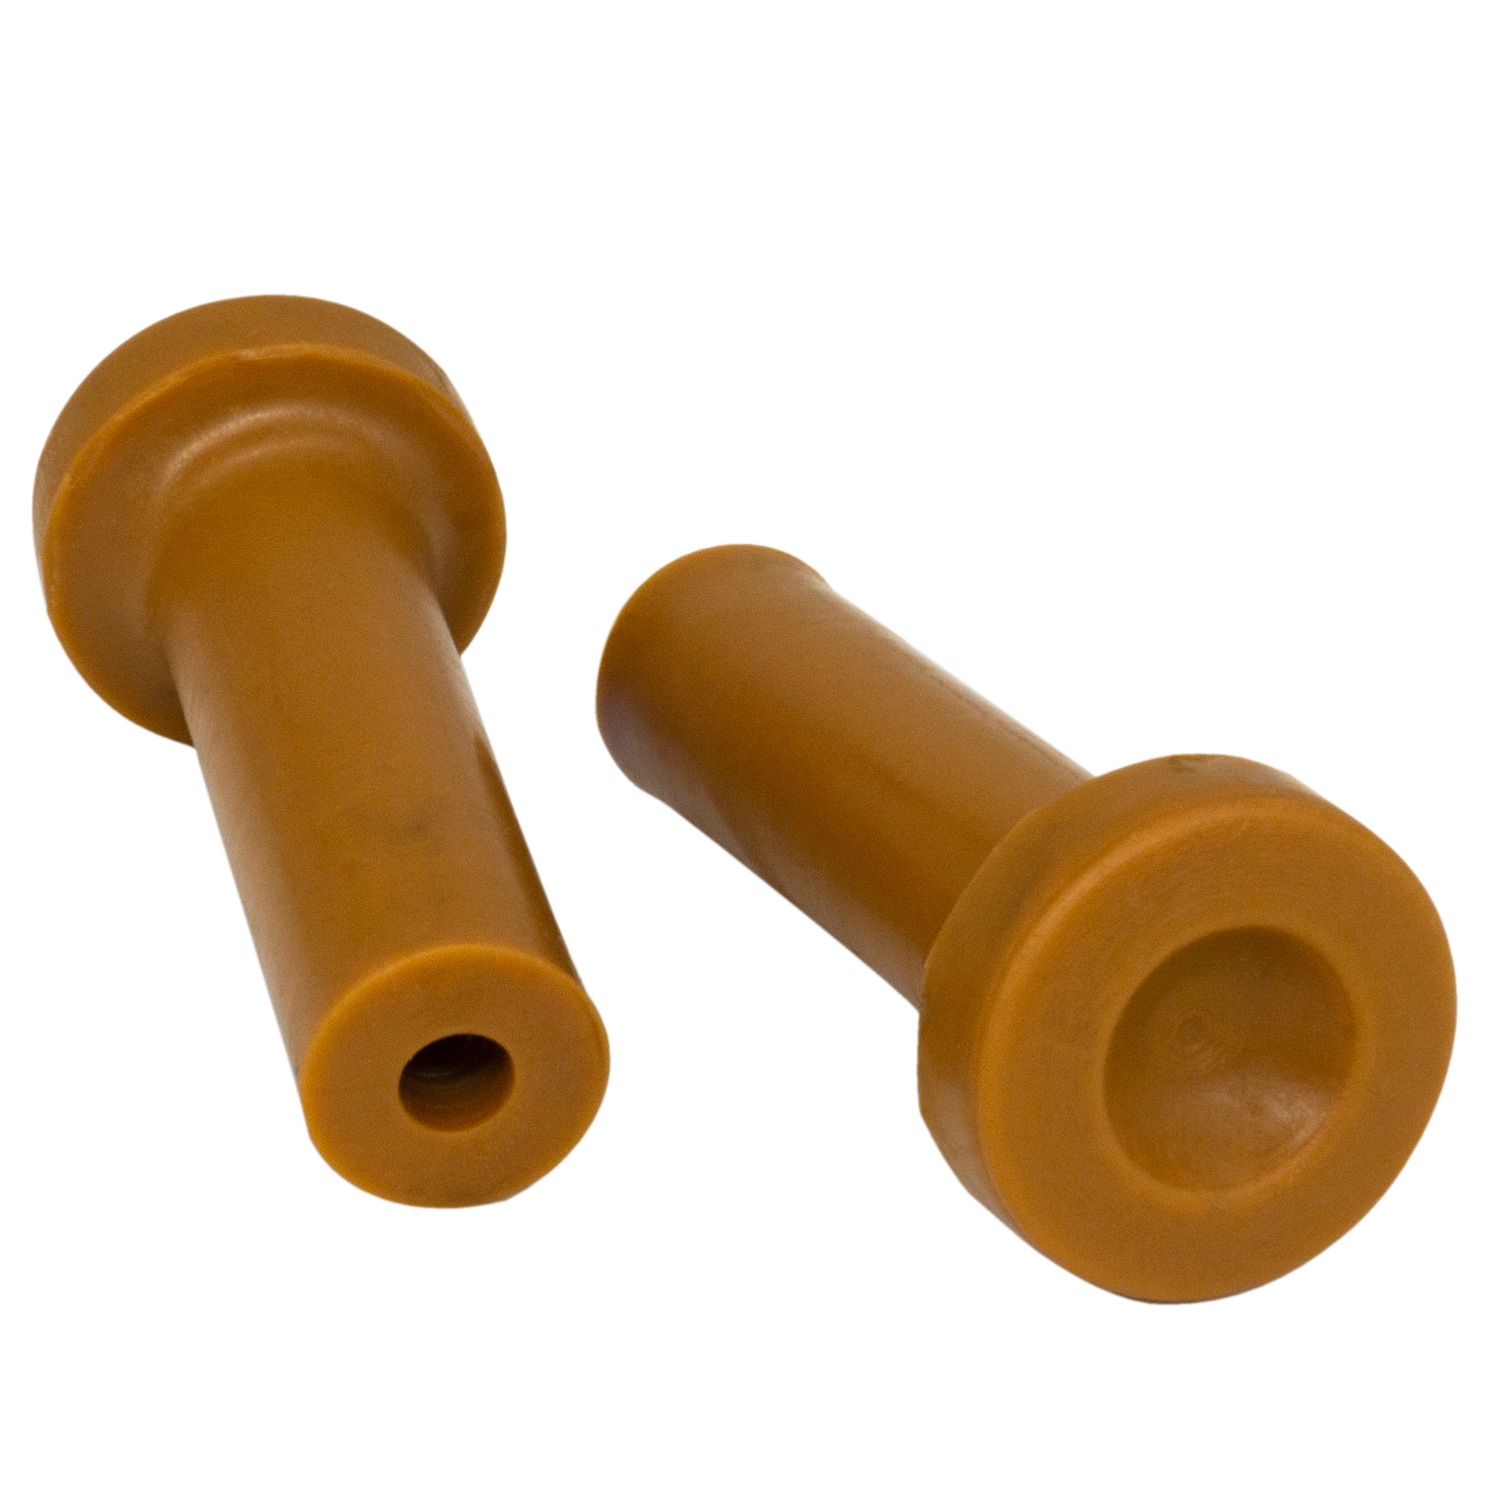 1963 Ford Country Sedan Door Lock Knob.  1-1/2 high.  Made of beige rubber.  Each-RP 306-D